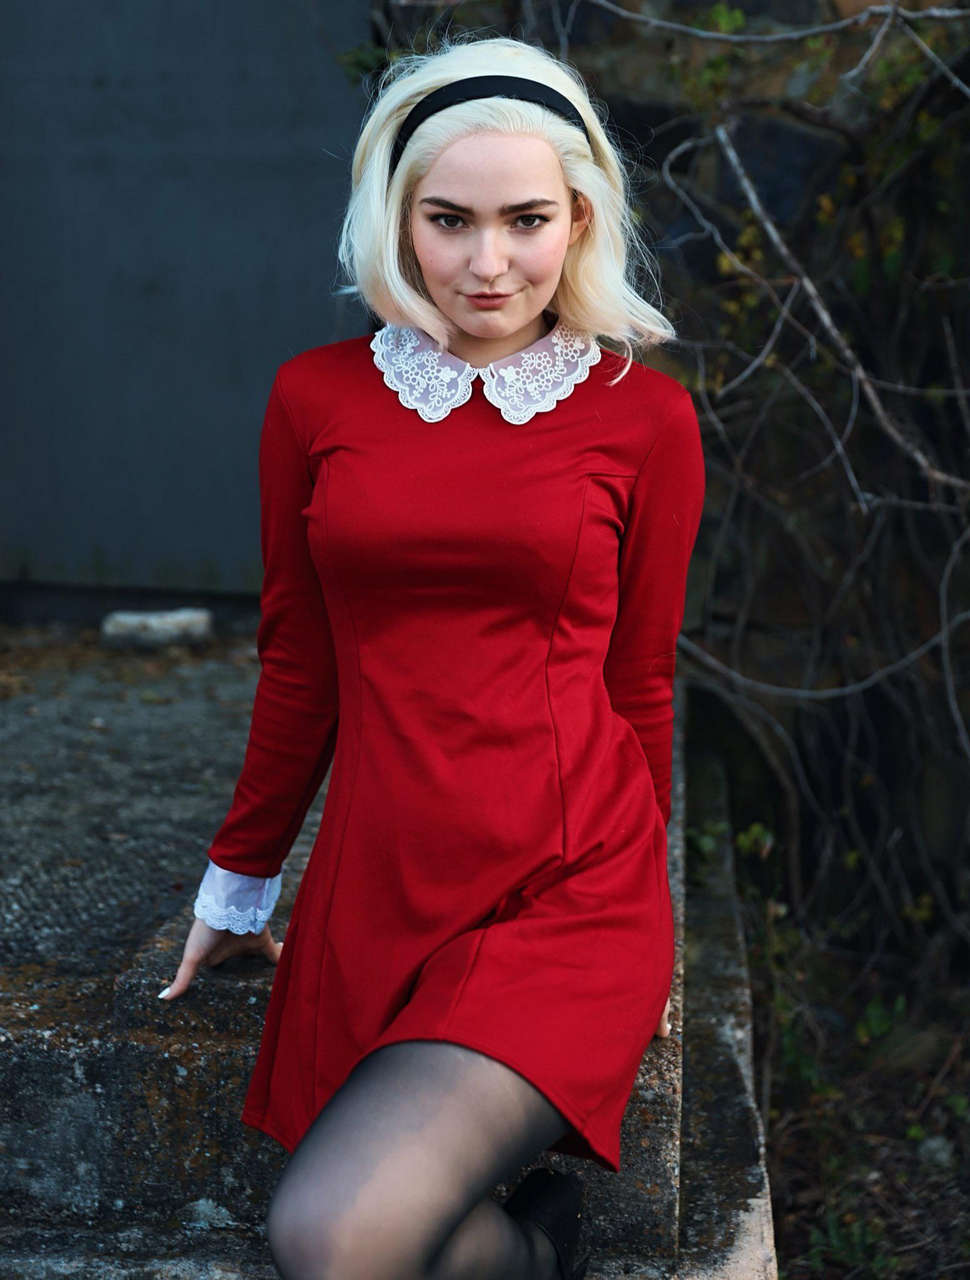 Sabrina The Teenage Witch By Omgcosplay 0